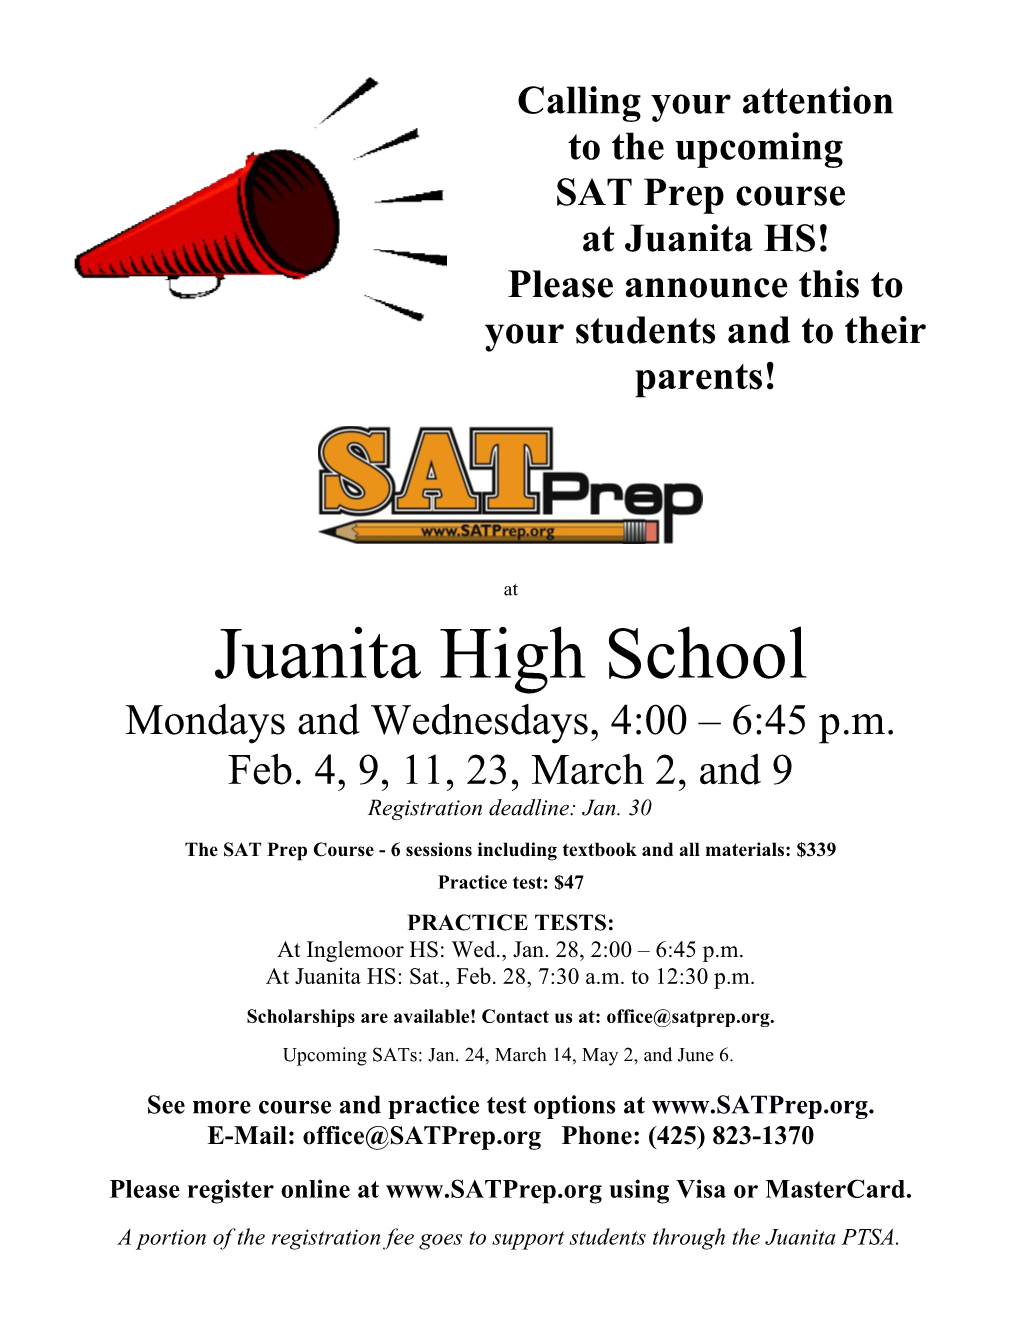 The SAT Prep Course - 6 Sessions Including Textbook and All Materials: $339